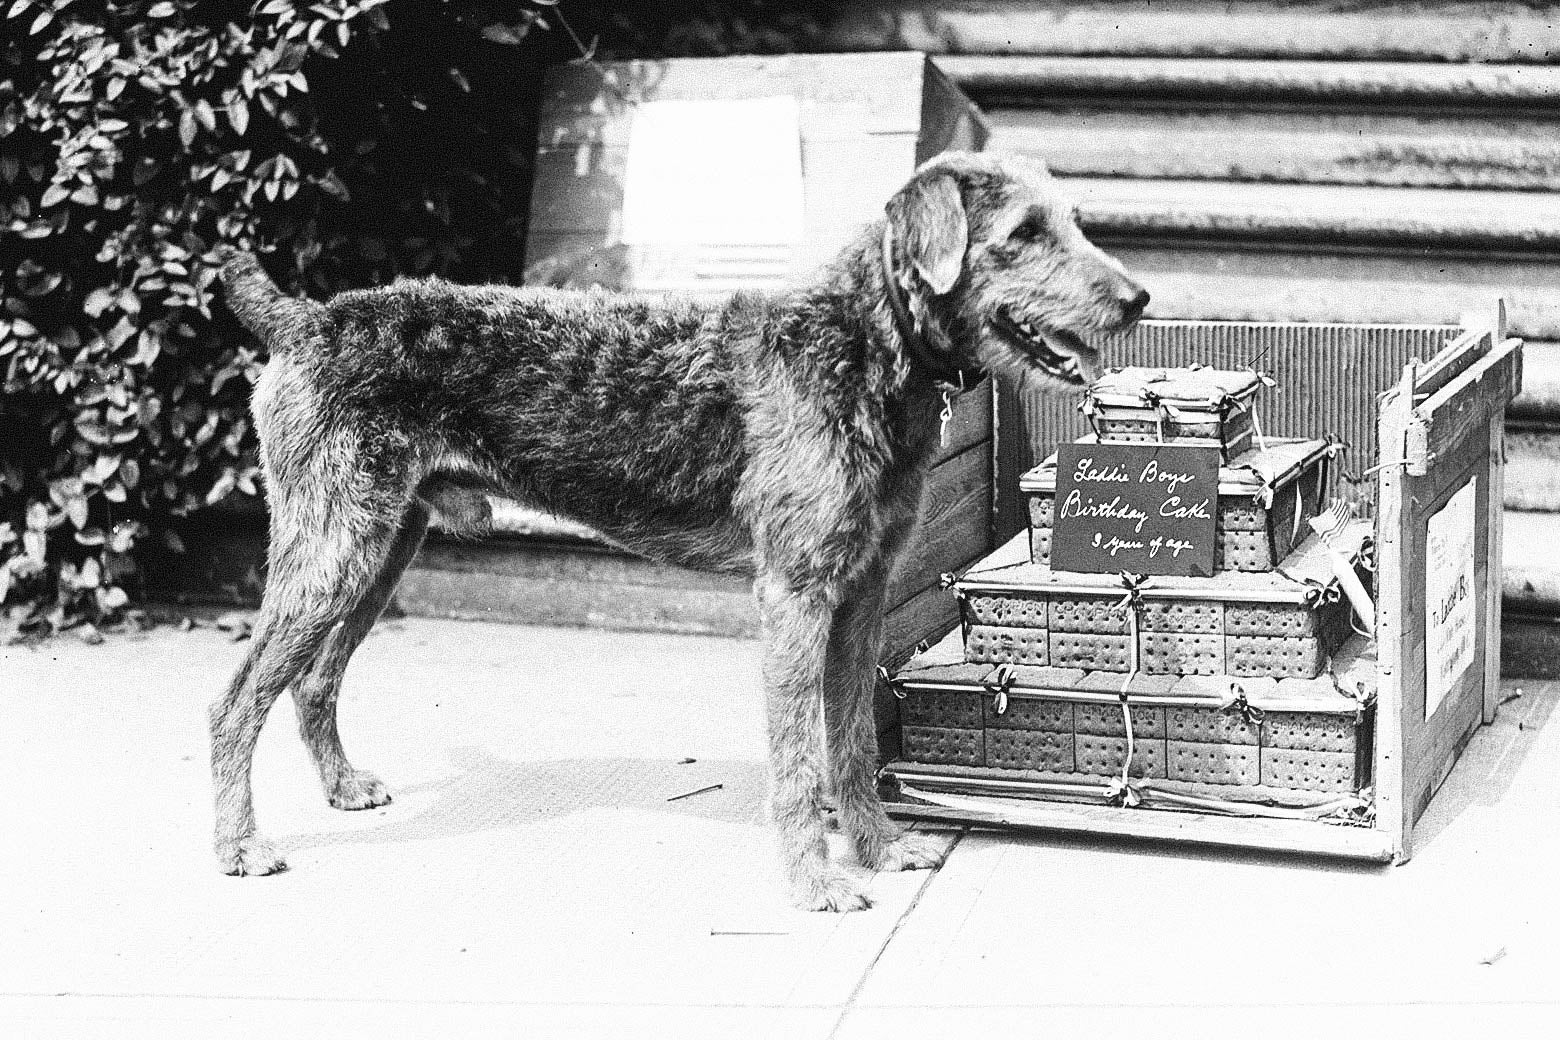 An Airedale terrier standing in front of a cake made of dog biscuits, with a sign noting he is 3 years old.